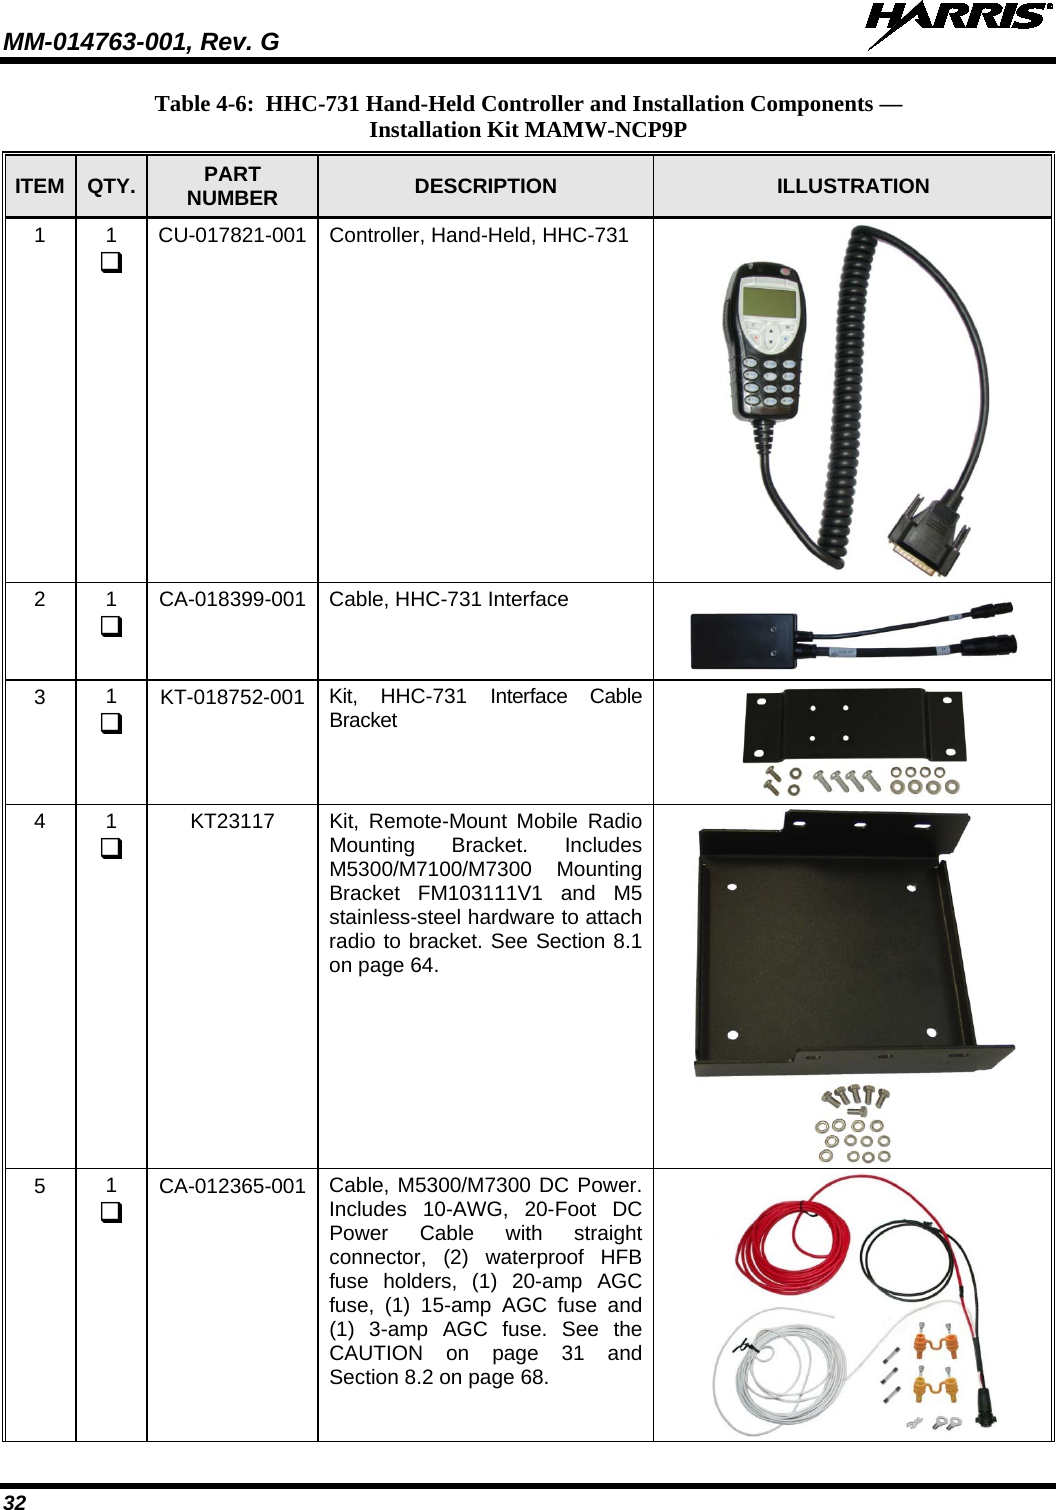 MM-014763-001, Rev. G   32 Table 4-6:  HHC-731 Hand-Held Controller and Installation Components —  Installation Kit MAMW-NCP9P ITEM QTY. PART NUMBER DESCRIPTION  ILLUSTRATION 1  1  CU-017821-001 Controller, Hand-Held, HHC-731  2  1  CA-018399-001 Cable, HHC-731 Interface  3  1  KT-018752-001 Kit, HHC-731 Interface Cable Bracket  4  1  KT23117 Kit, Remote-Mount Mobile Radio Mounting Bracket. Includes M5300/M7100/M7300 Mounting Bracket FM103111V1 and M5 stainless-steel hardware to attach radio to bracket. See Section 8.1 on page 64.  5  1  CA-012365-001 Cable, M5300/M7300 DC Power. Includes 10-AWG, 20-Foot DC Power Cable with straight connector, (2) waterproof HFB fuse holders, (1) 20-amp AGC fuse, (1) 15-amp AGC fuse and (1) 3-amp AGC fuse. See the CAUTION  on page 31 and Section 8.2 on page 68.  